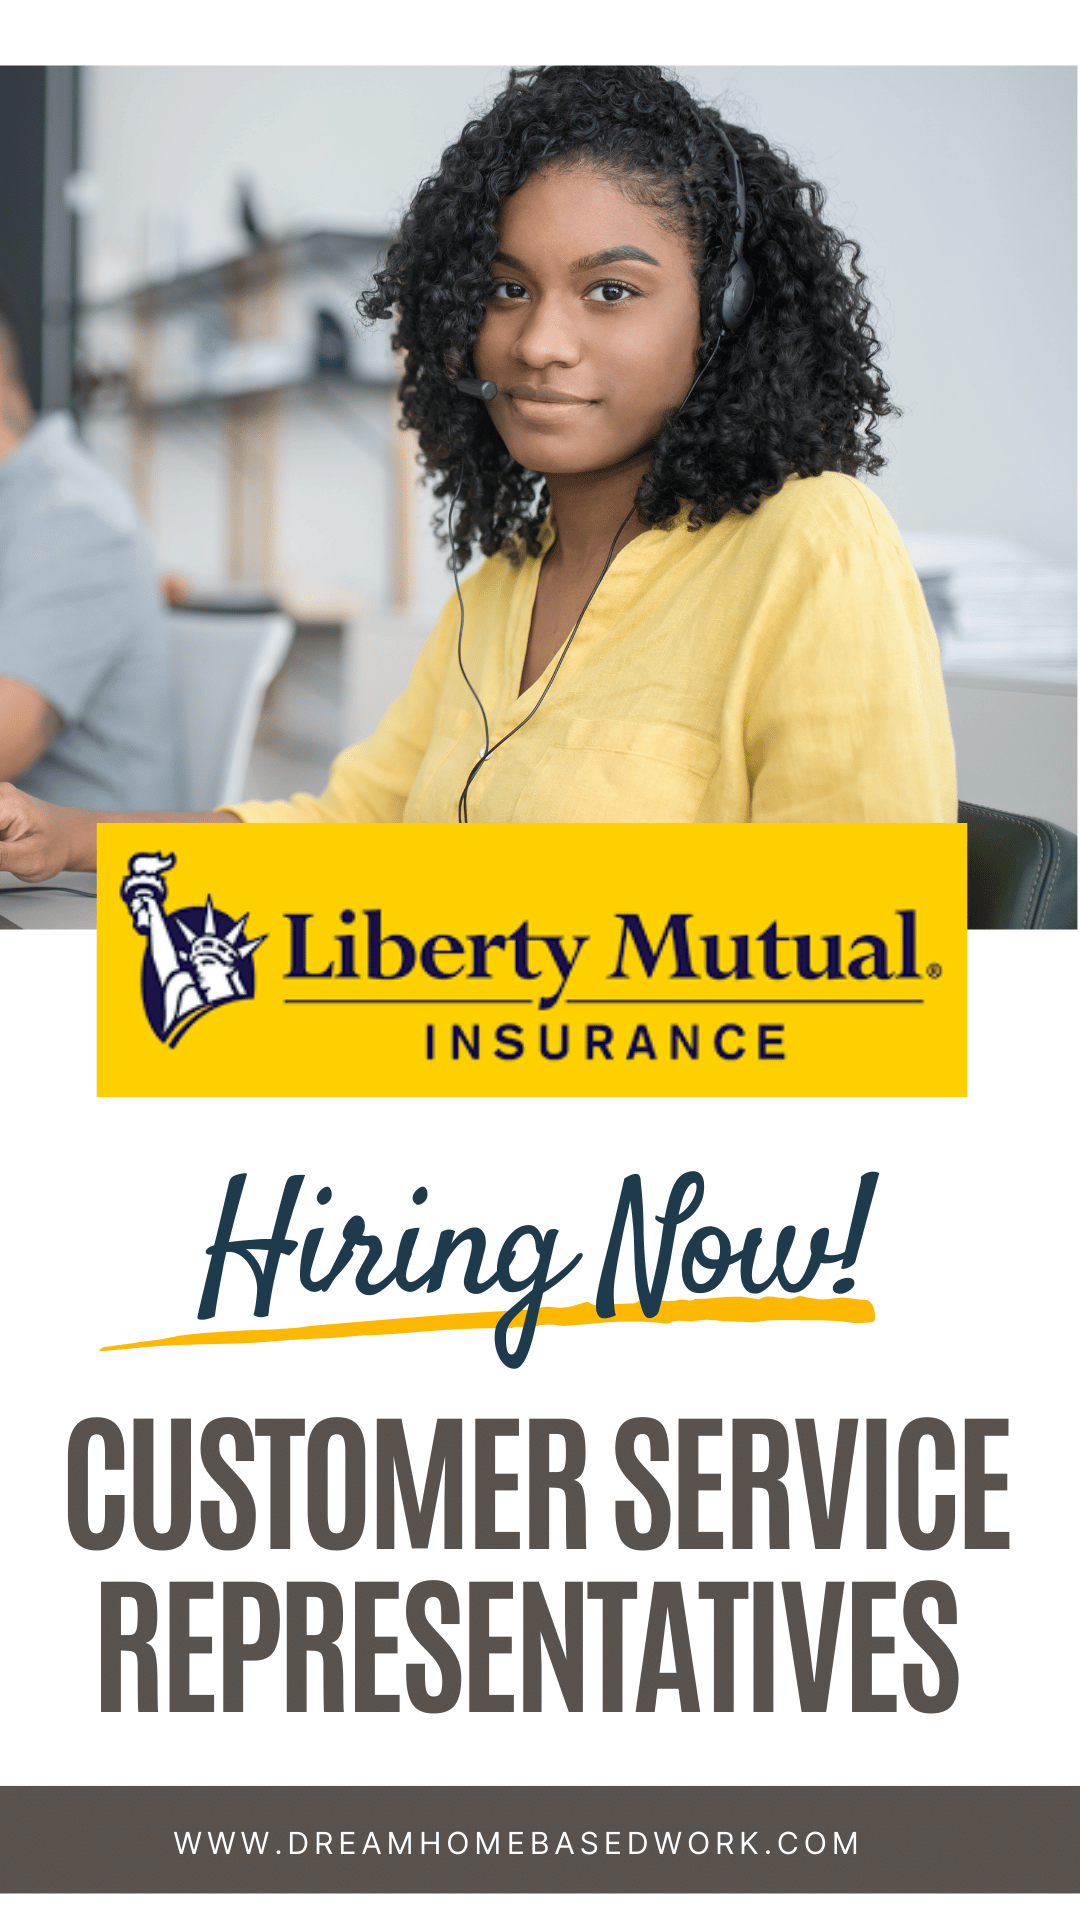 Liberty Mutual is Hiring WorkatHome Customer Service Reps!